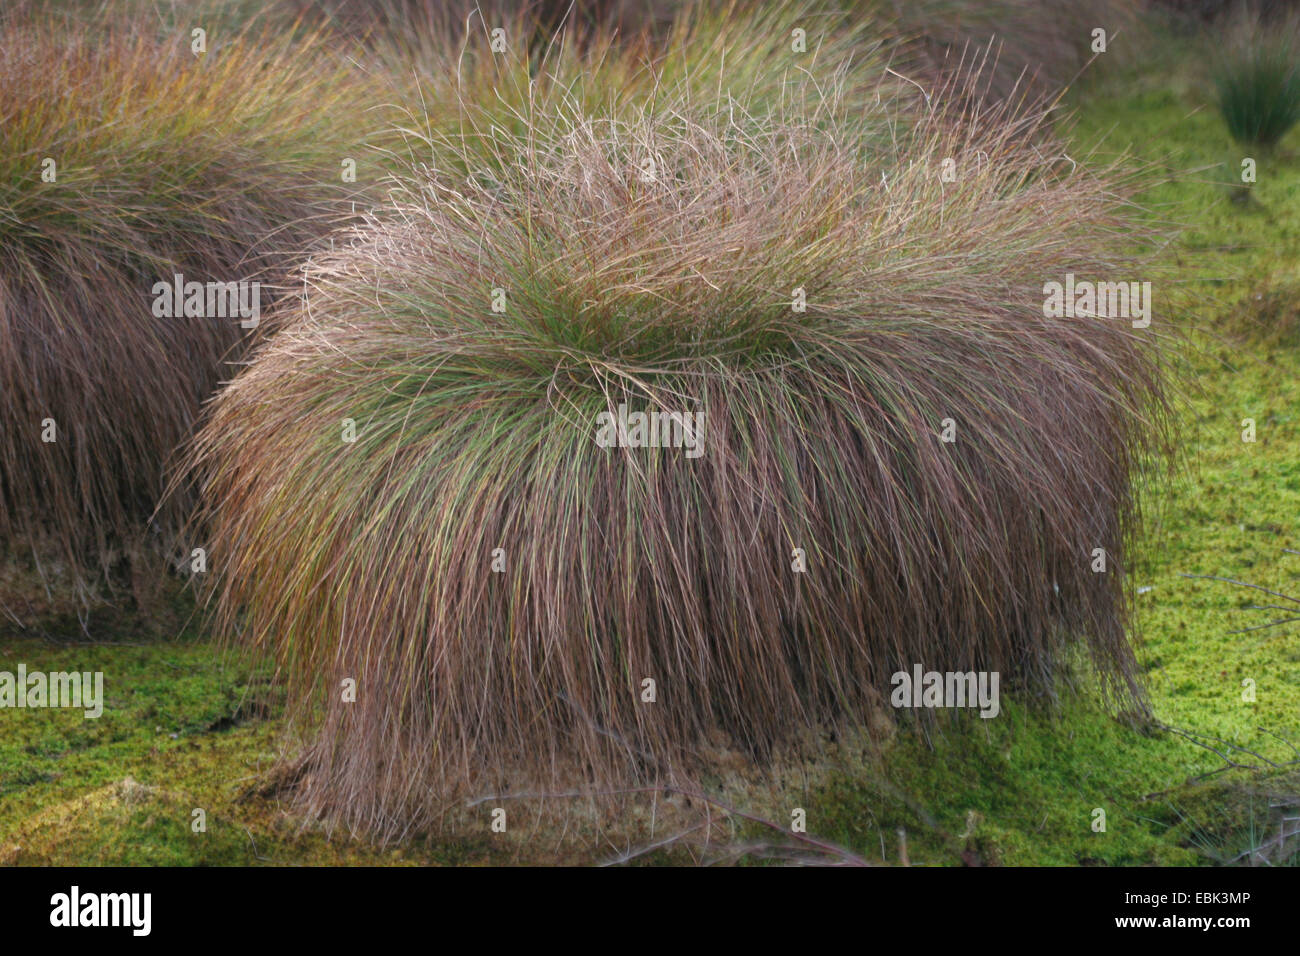 greater tussock-sedge (Carex paniculata), tussock in a mire, Germany, Lower Saxony, Diepholzer Moorniederung Stock Photo